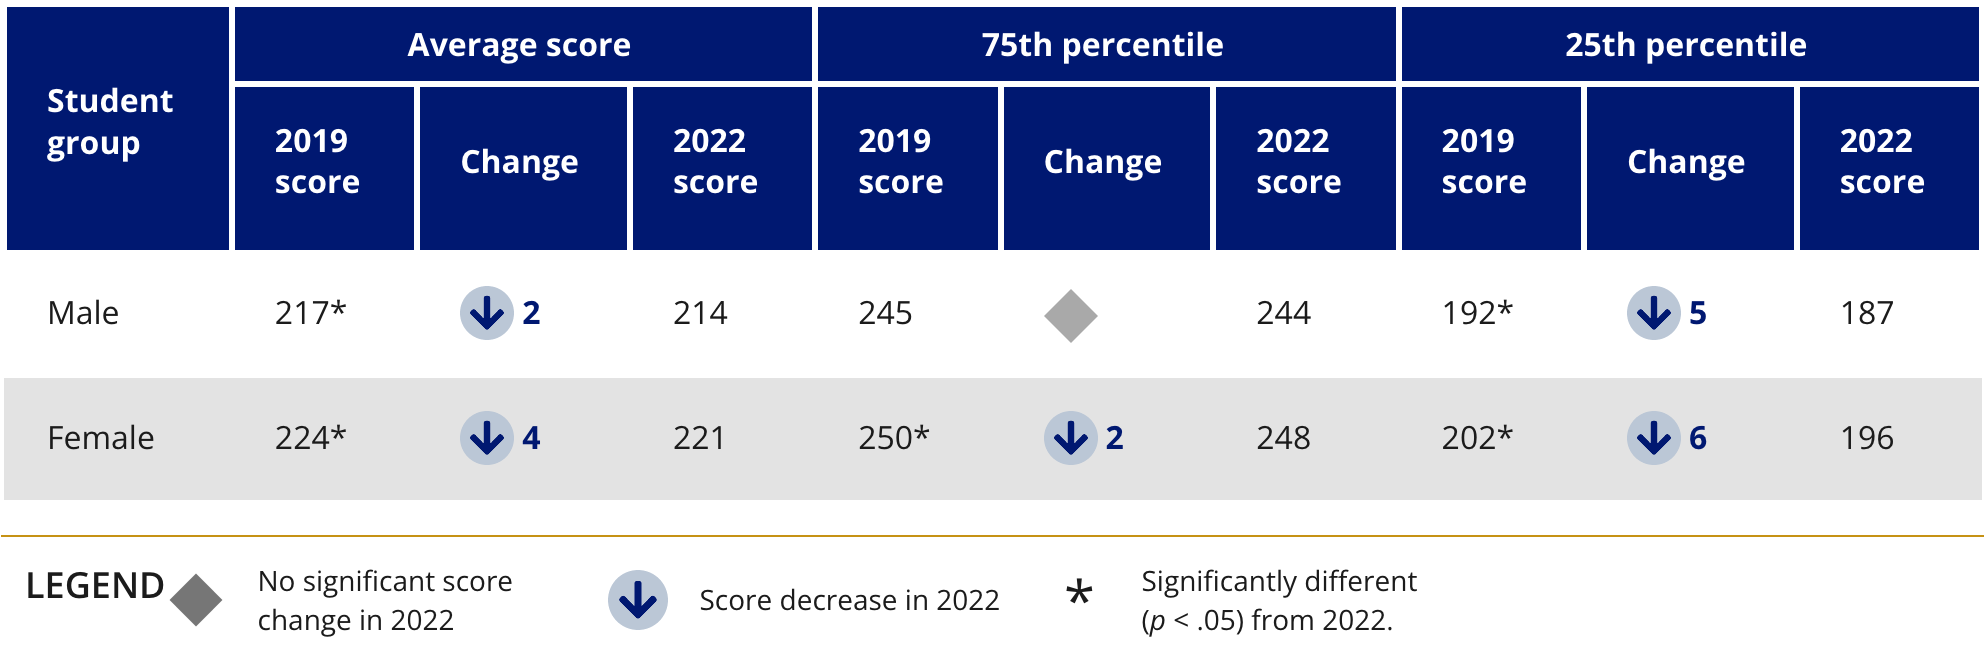 Changes in Fourth-Grade NAEP Reading Scores Between 2019 and 2022, by Gender